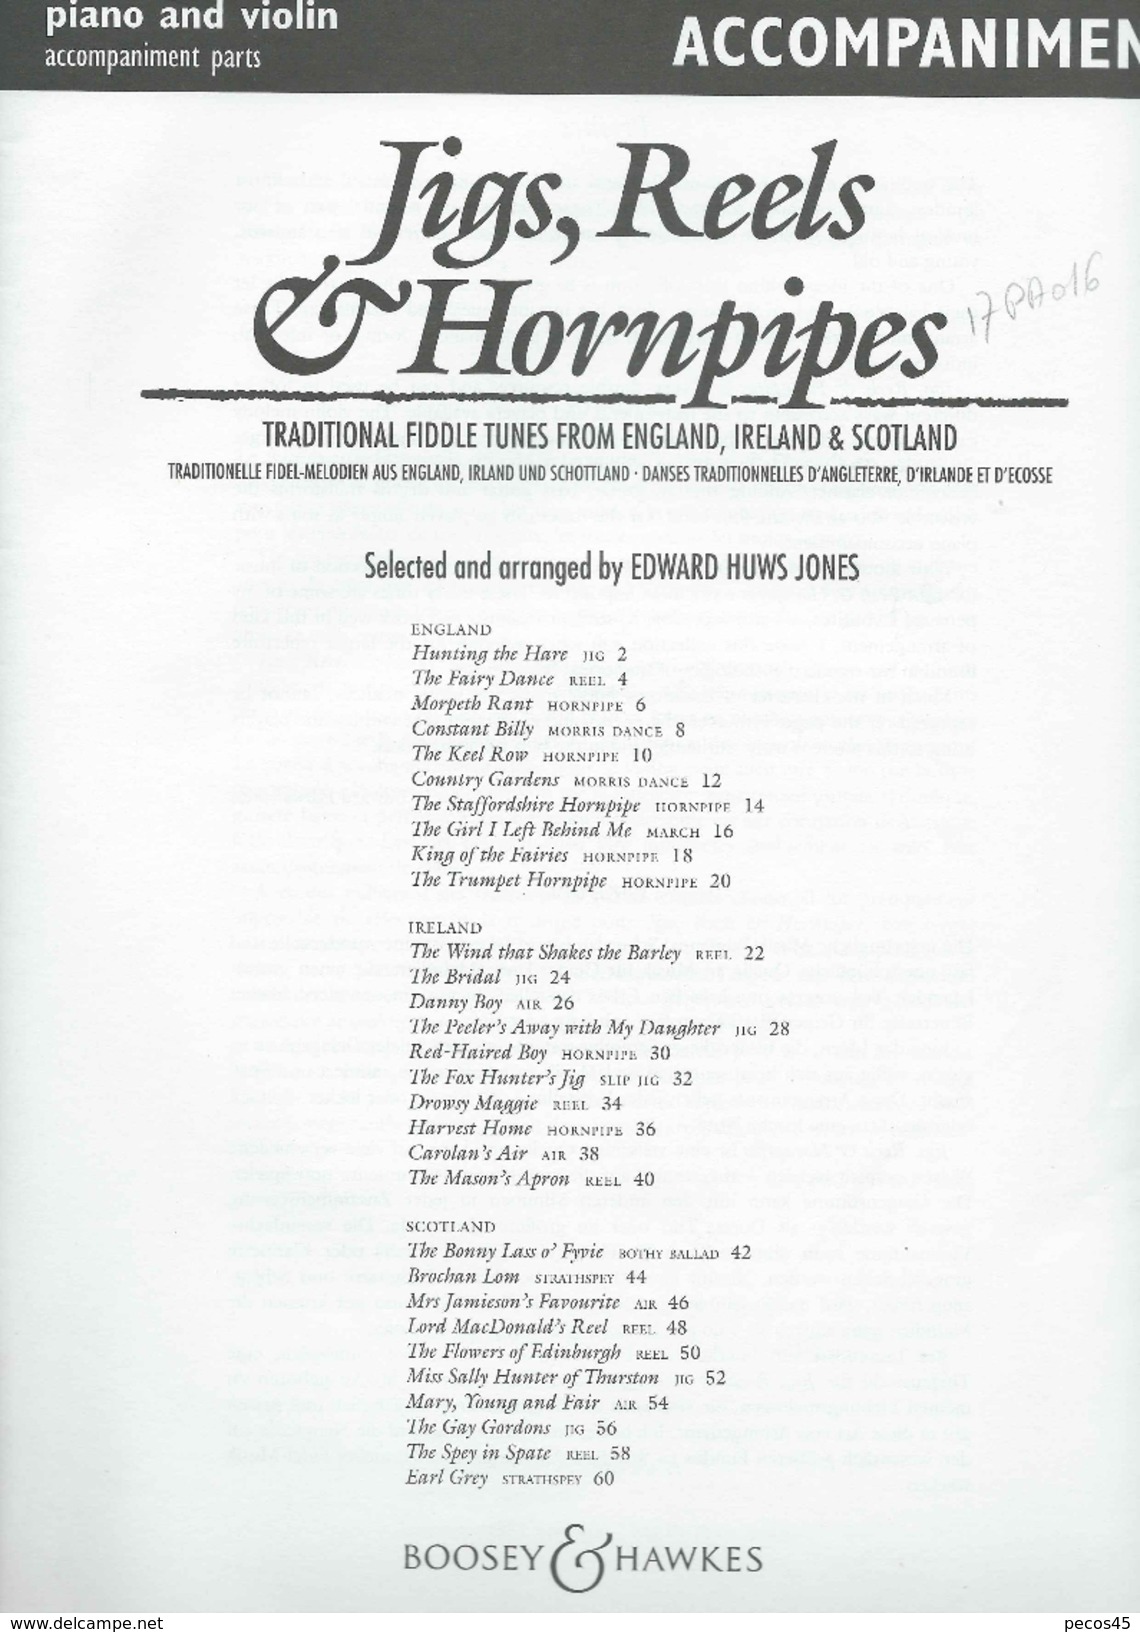 "JIGS, REELS & HORNPIPES" - Editions Boosey & Hawkes / London - 1992. - Musique Folklorique